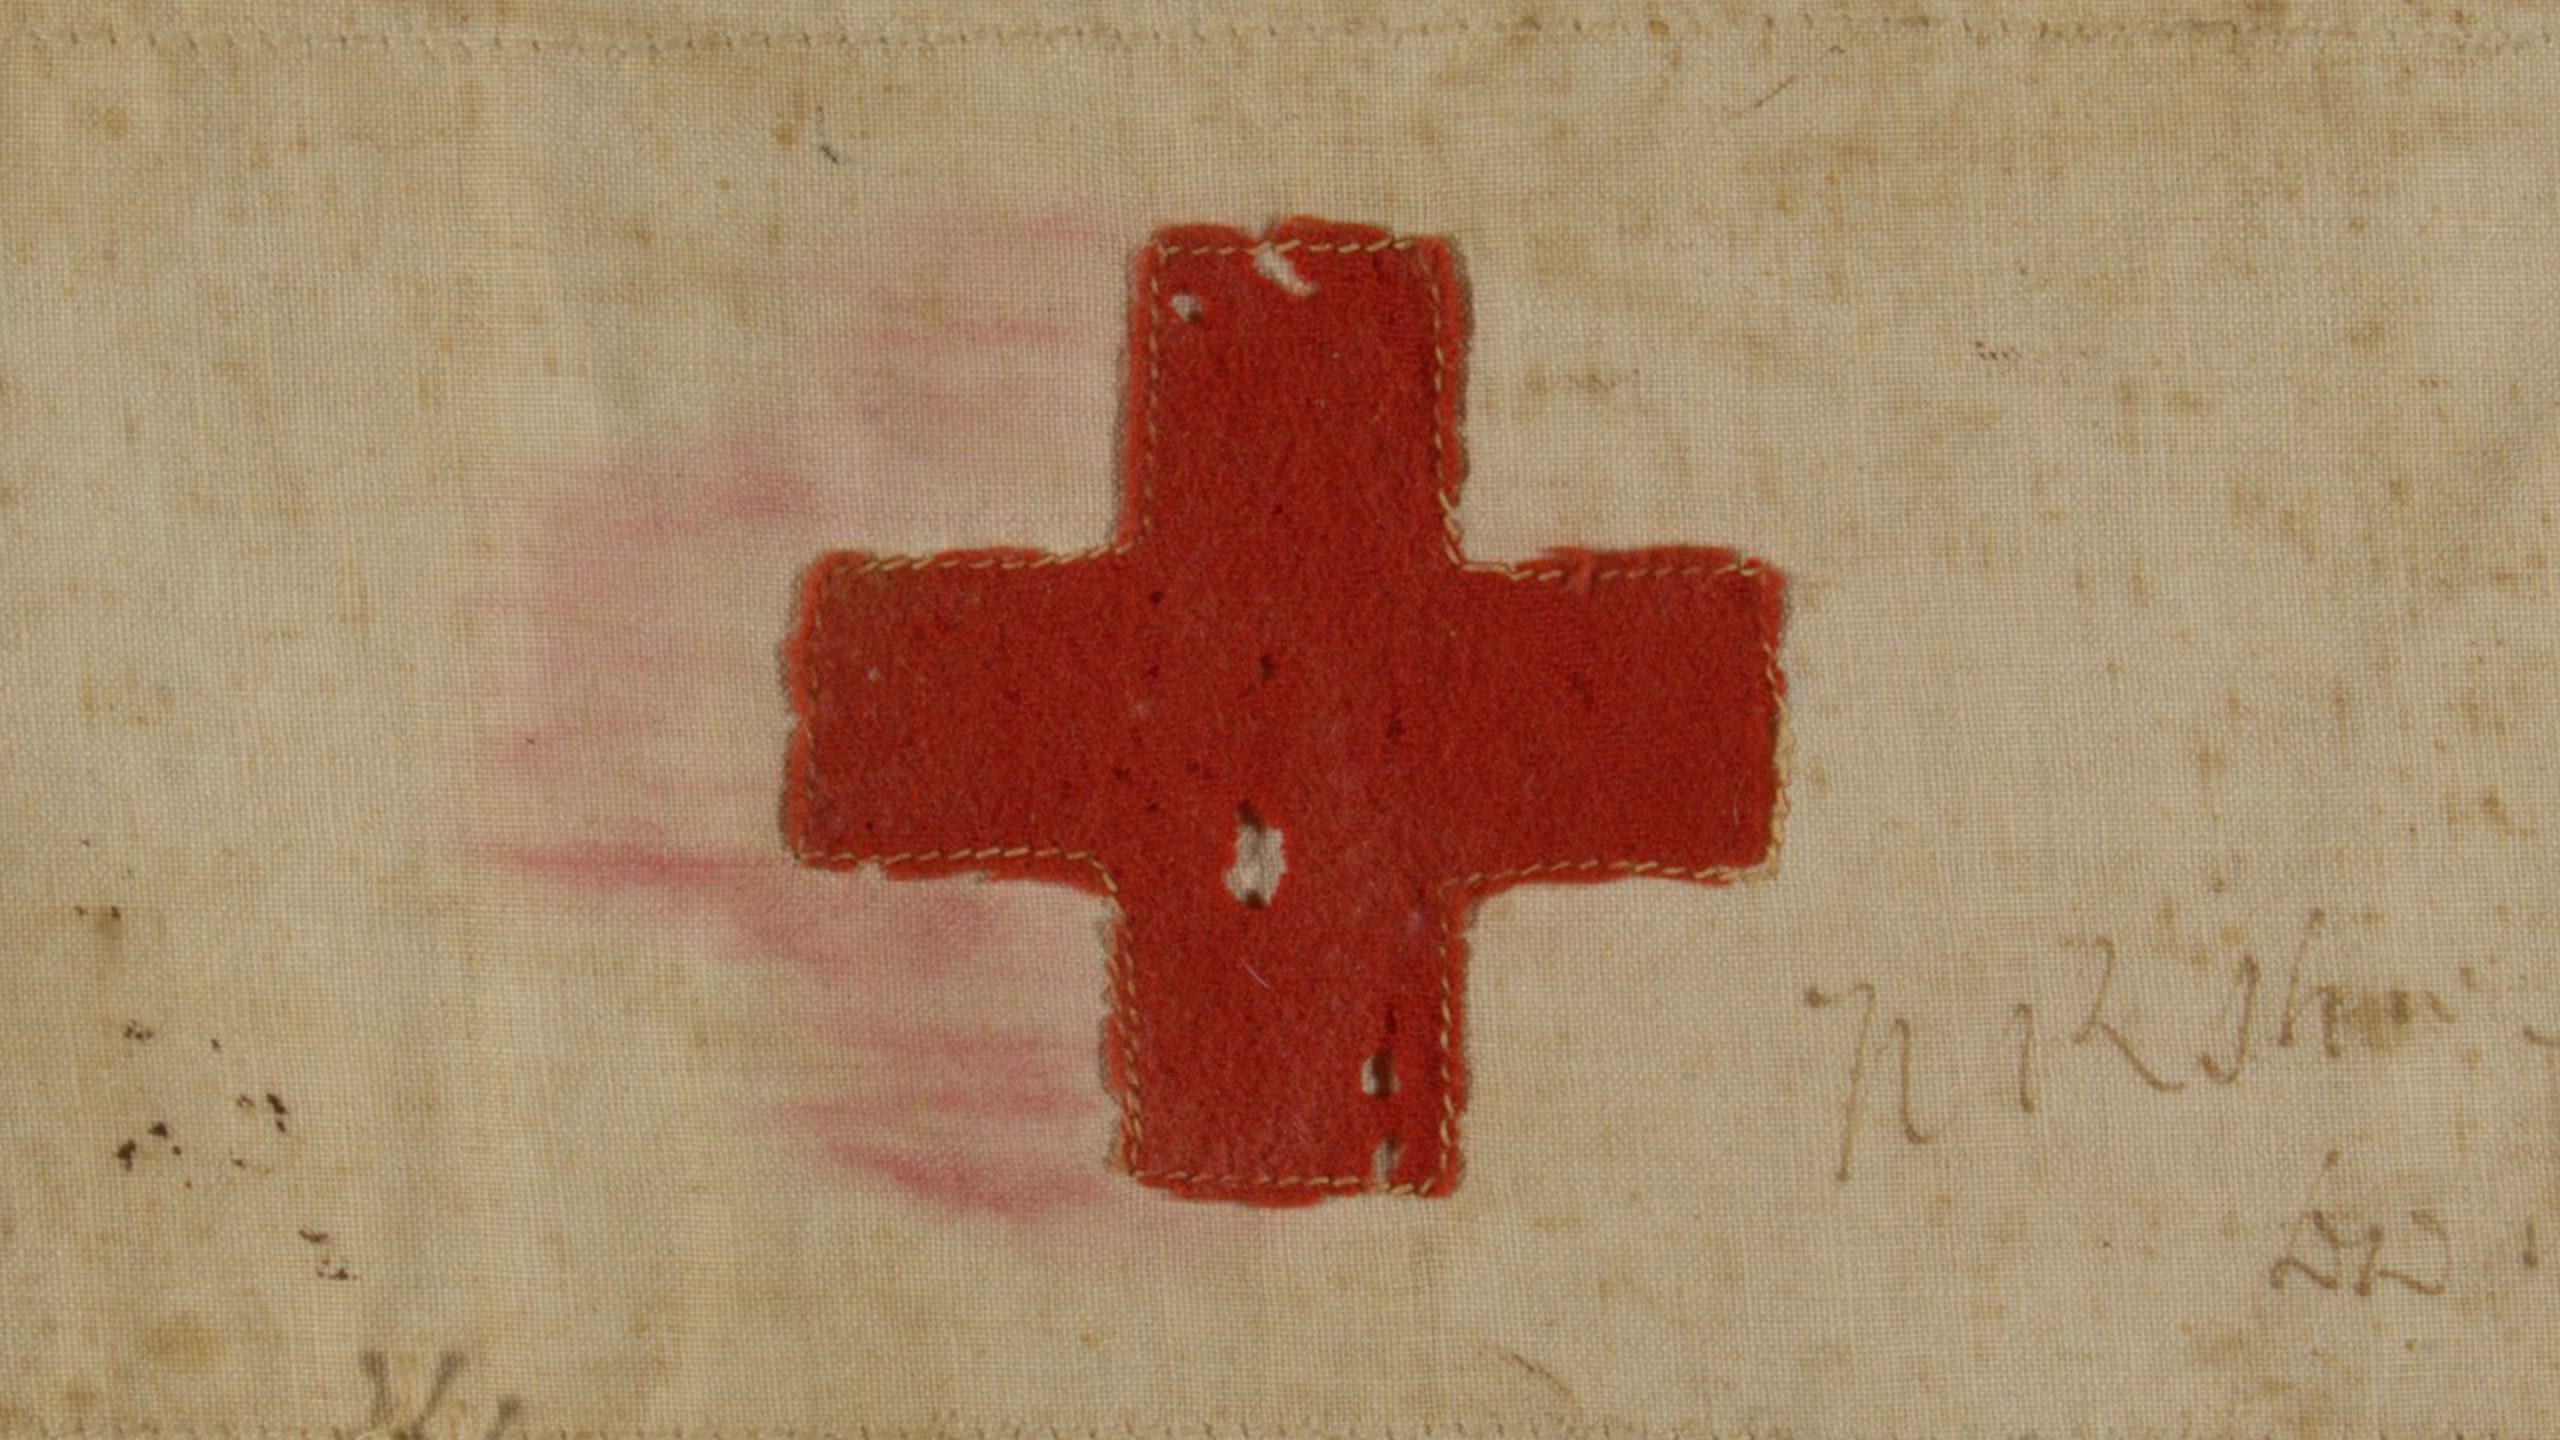 Red Cross stitched into, and staining, yellowed fabric